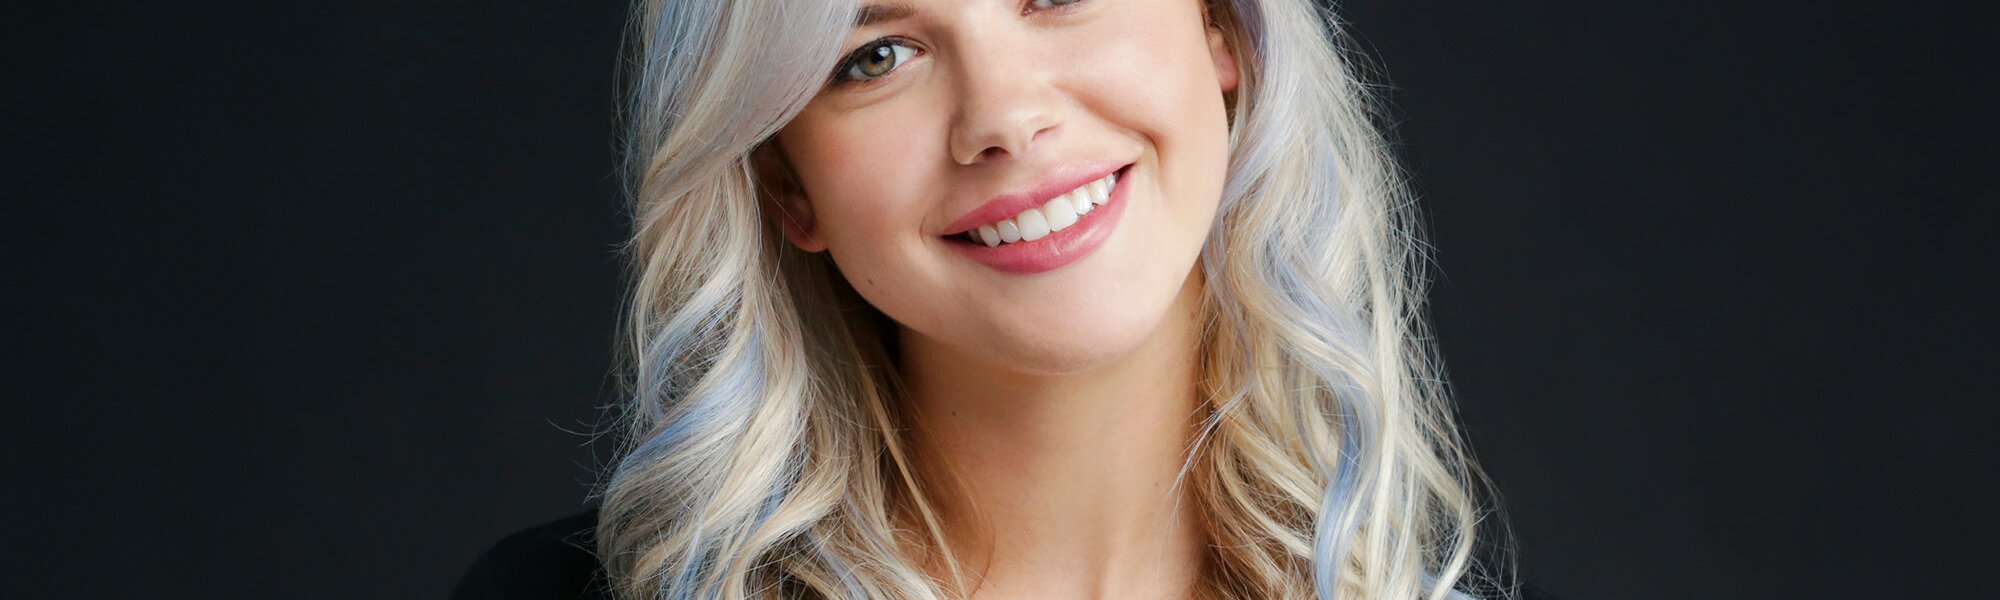 Why The Pastel Hair Trend Works On All Ages